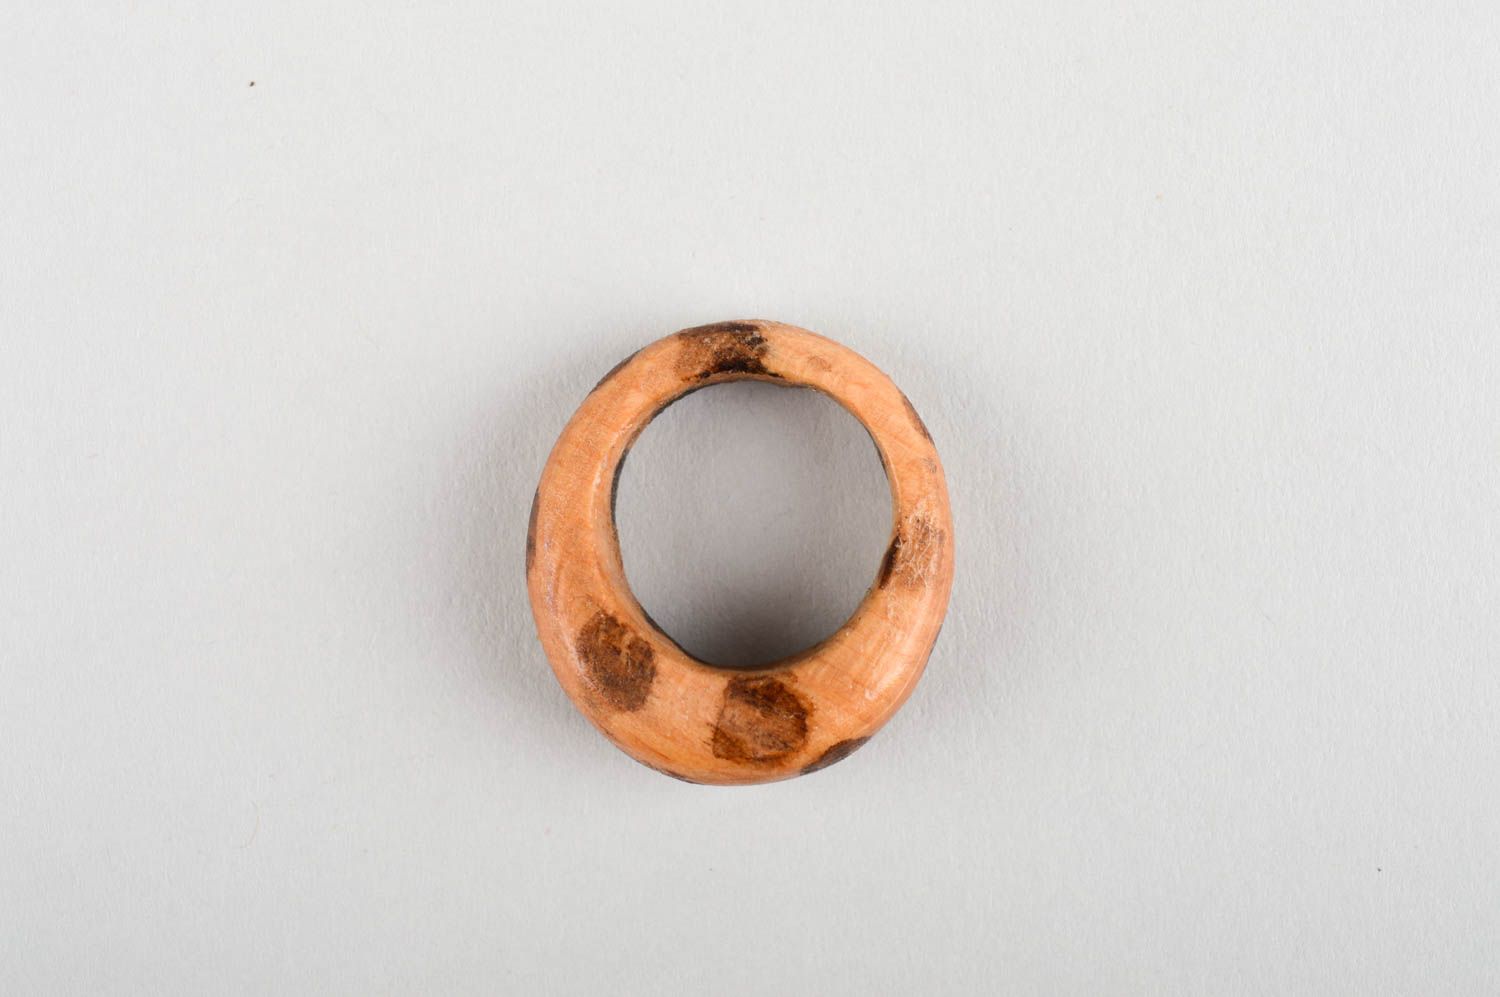 Unusual handmade wooden ring wood craft fashion accessories gifts for her photo 3